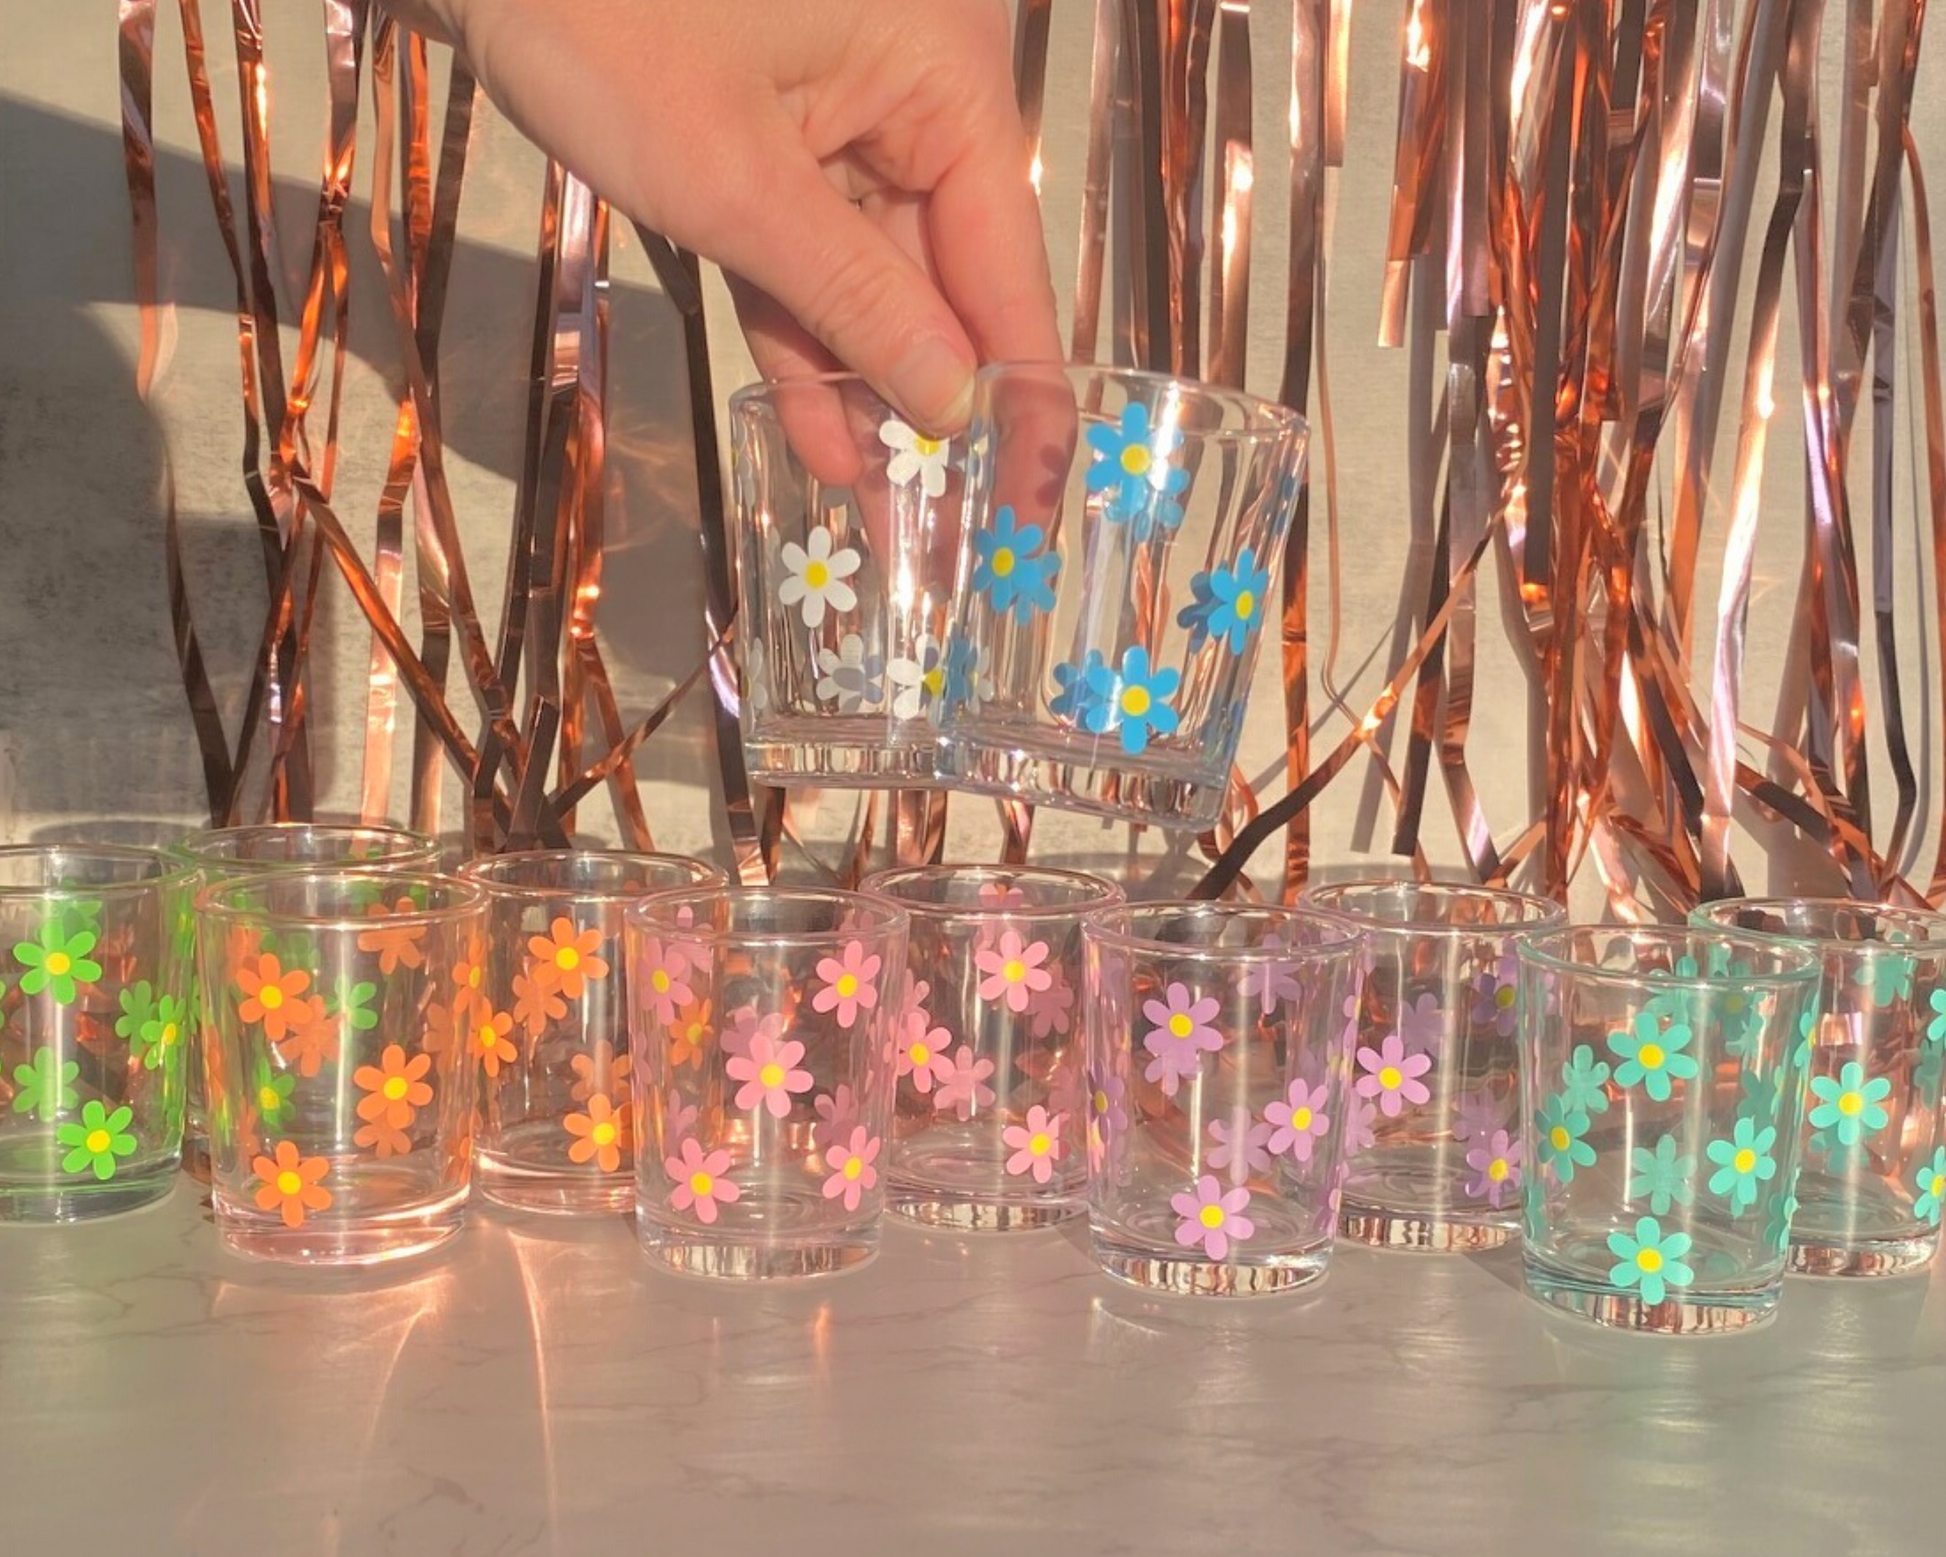 Daisy Flower Shot Glass, shown in the colors of the rainbow, pink, orange, green, mint, blue, and white, with a fun party background